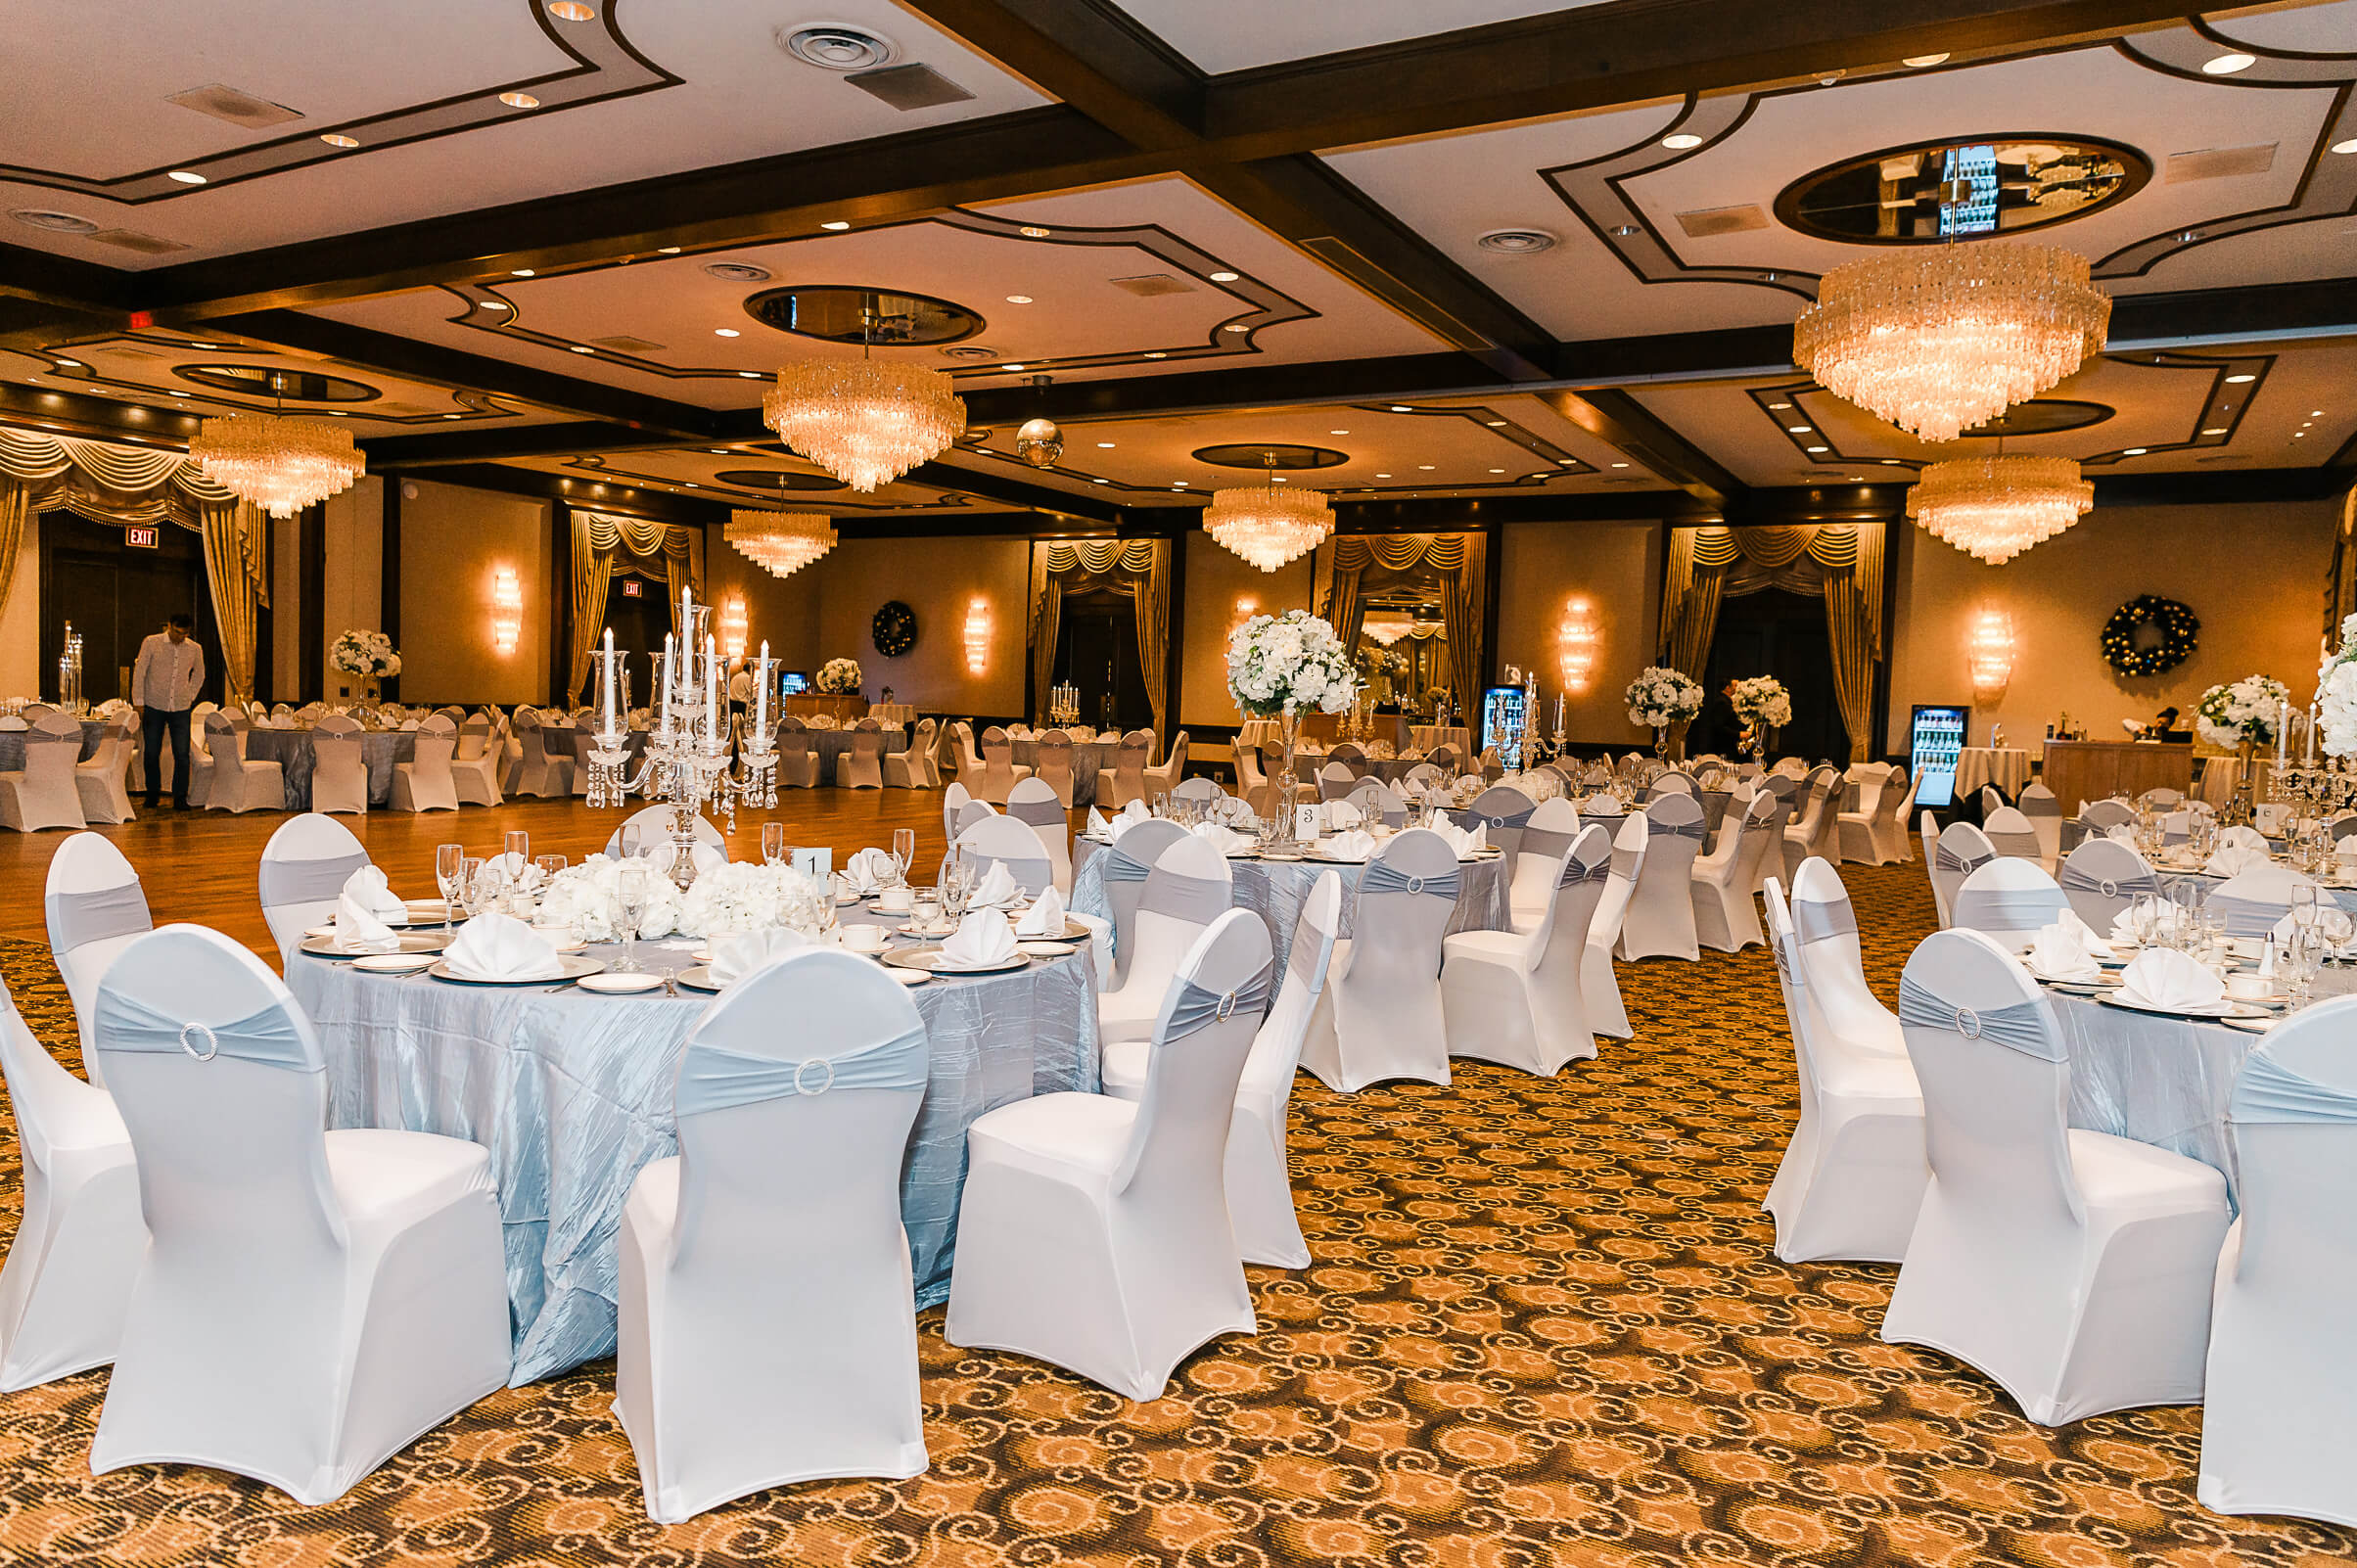 Winter themed tables and chairs set up at Chateau Lacombe